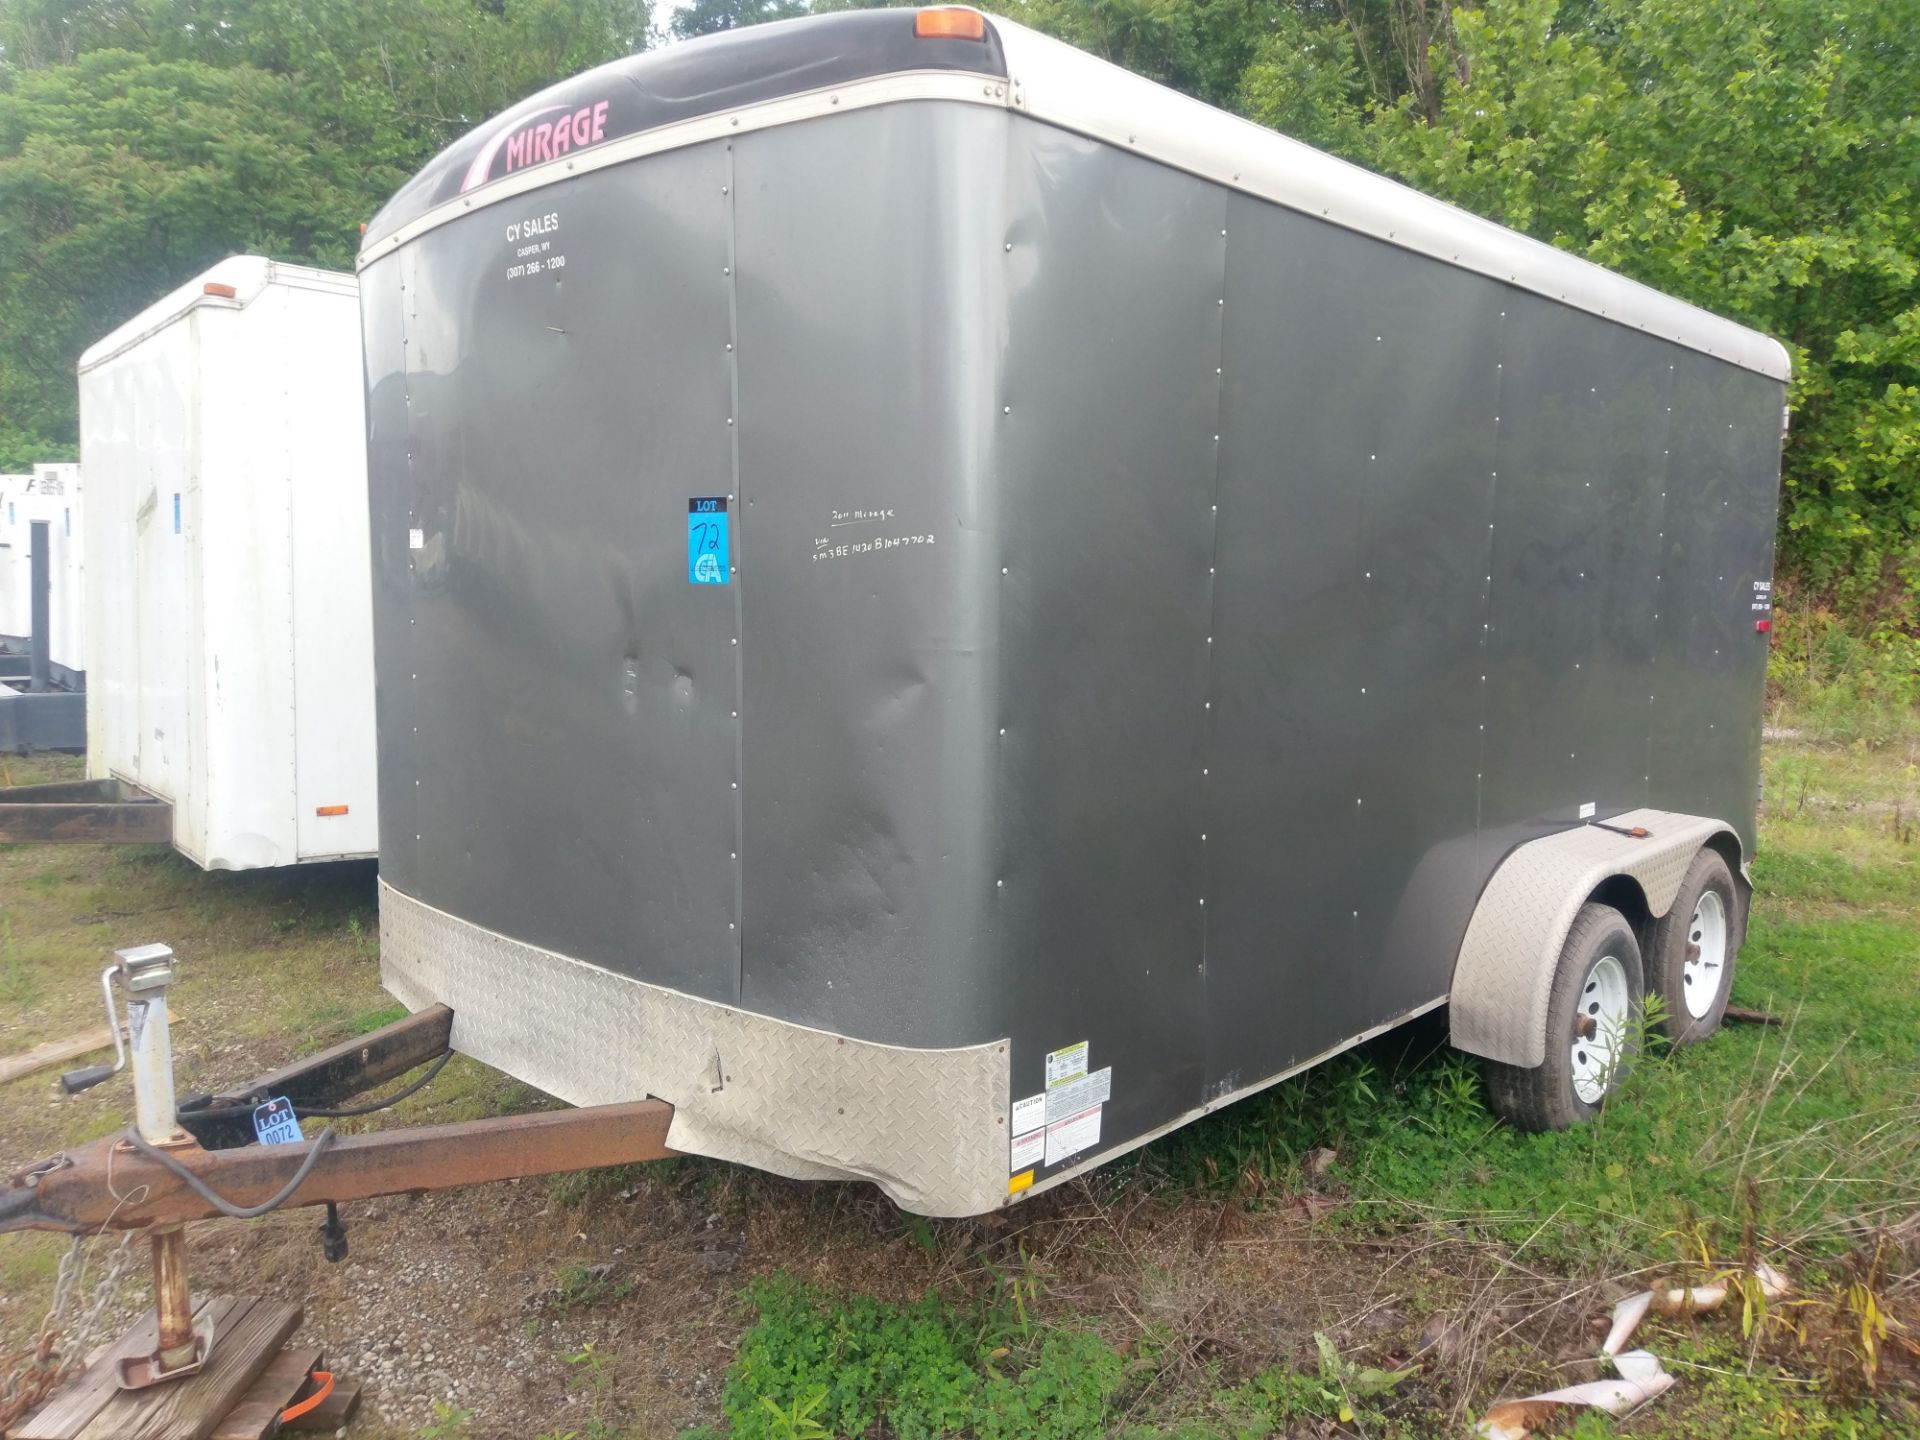 2011 MIRAGE TANDEM AXLE ENCLOSED TRAILER; VIN # 5M3BE1420B1047702, BALL HITCH, 7' X 15', DOUBLE REAR